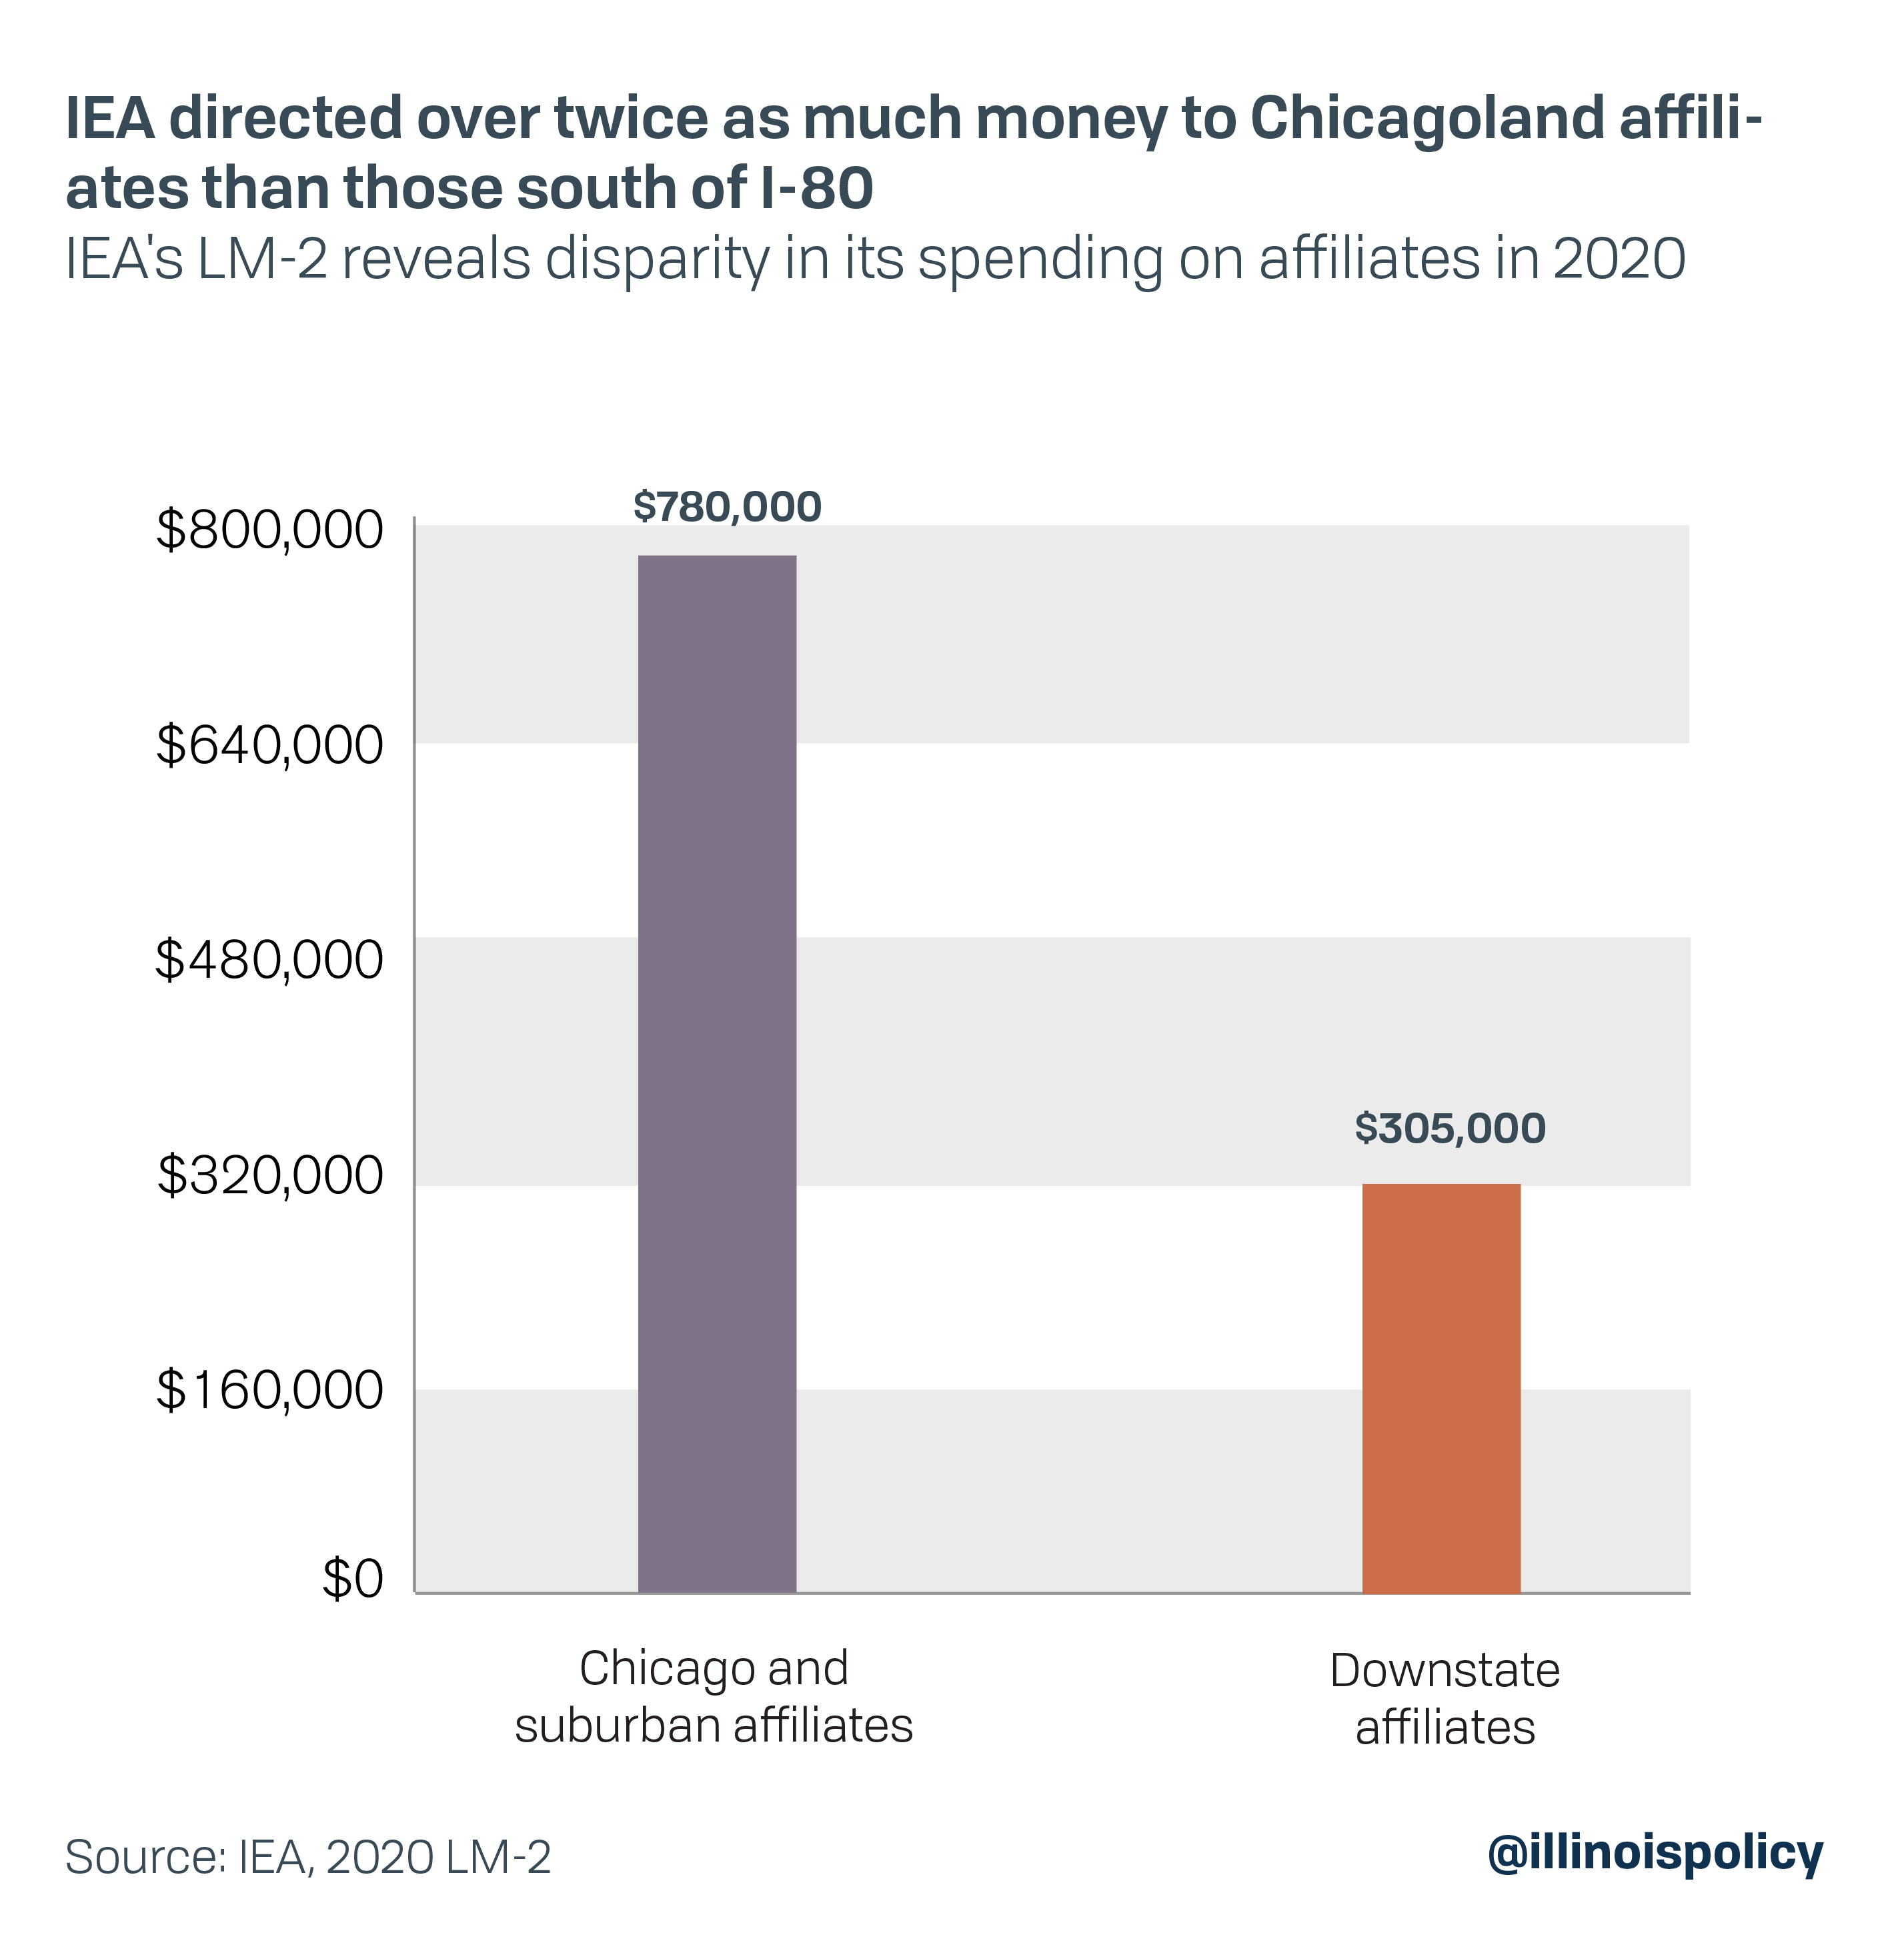 IEA directed over twice as much money to Chicagoland affiliates than those south of I-80